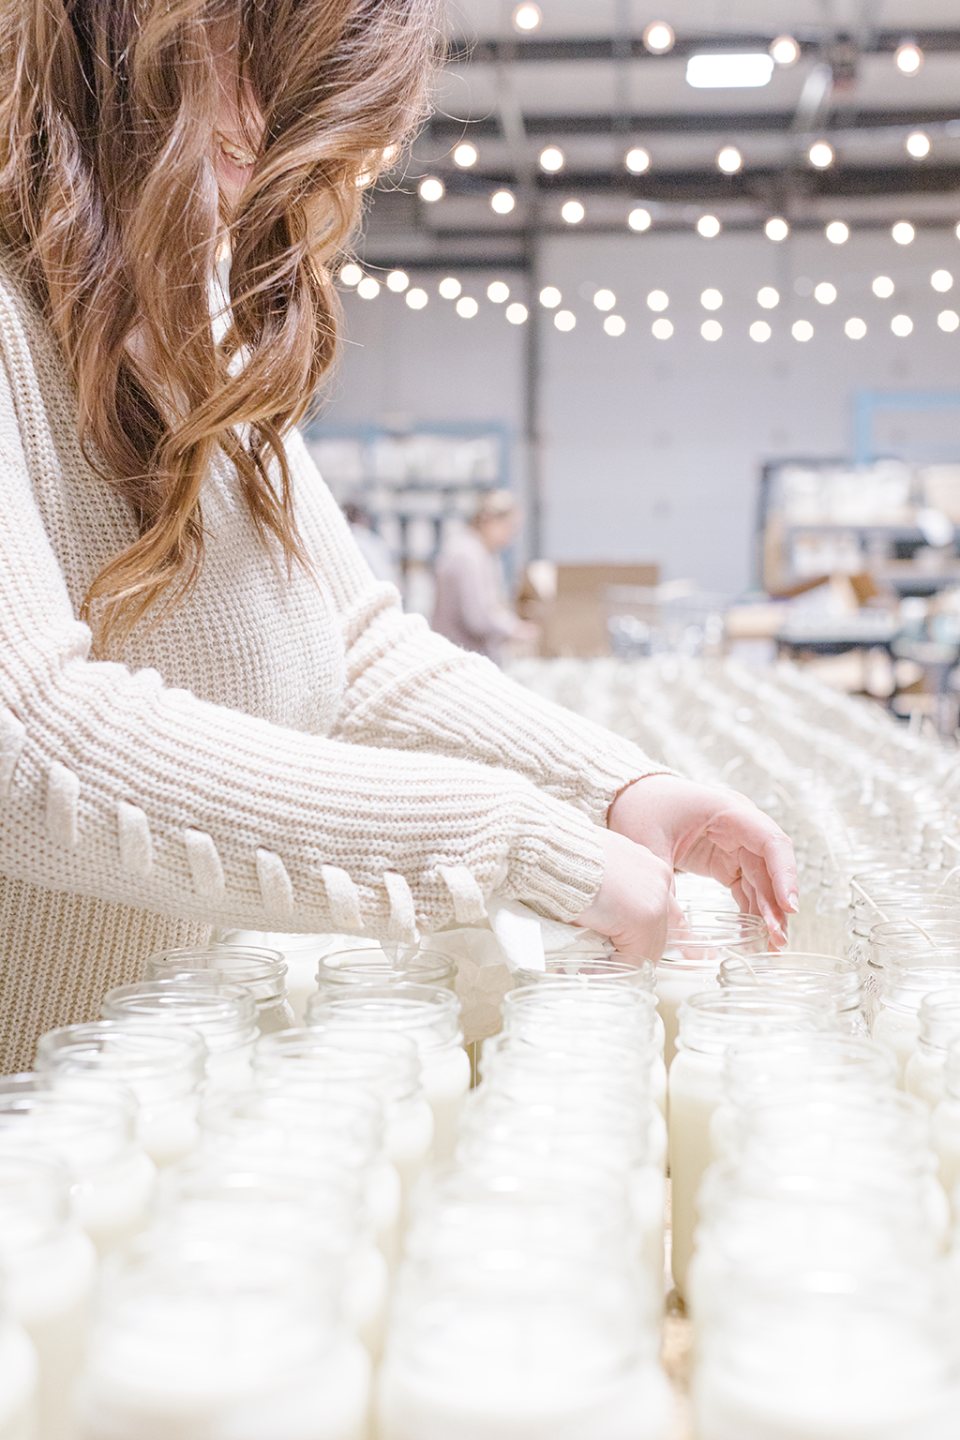 In this file photo, Antique Candle Co., based in Lafayette, moved its operations from Concord Road to Schuyler Avenue in Lafayette's north end as part of a $1.1 million expansion.